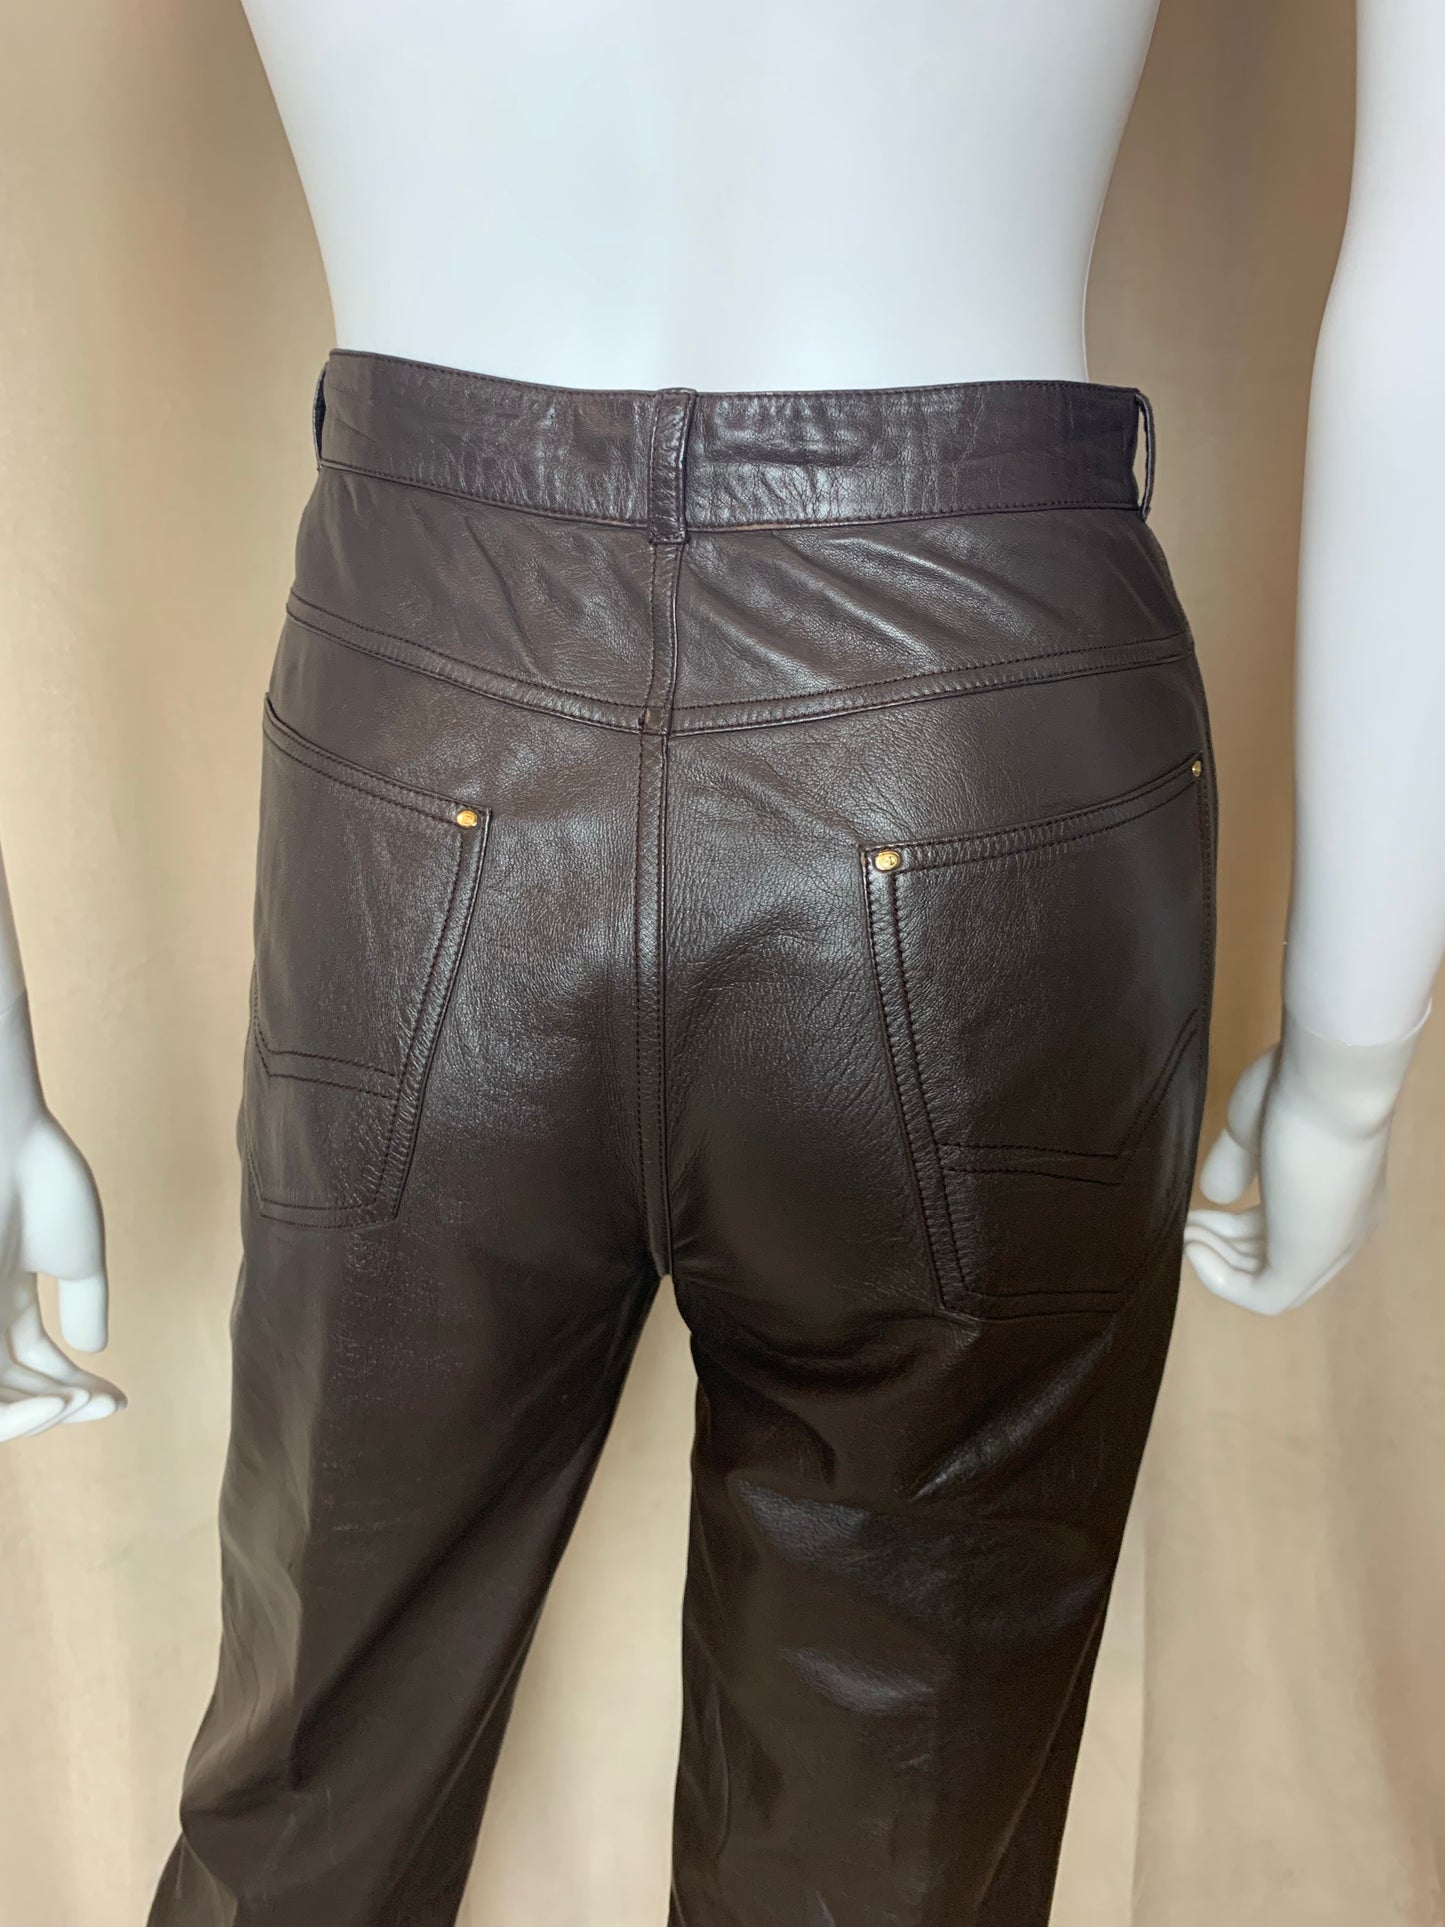 Gucci 1970’s High-Waisted Leather Pants